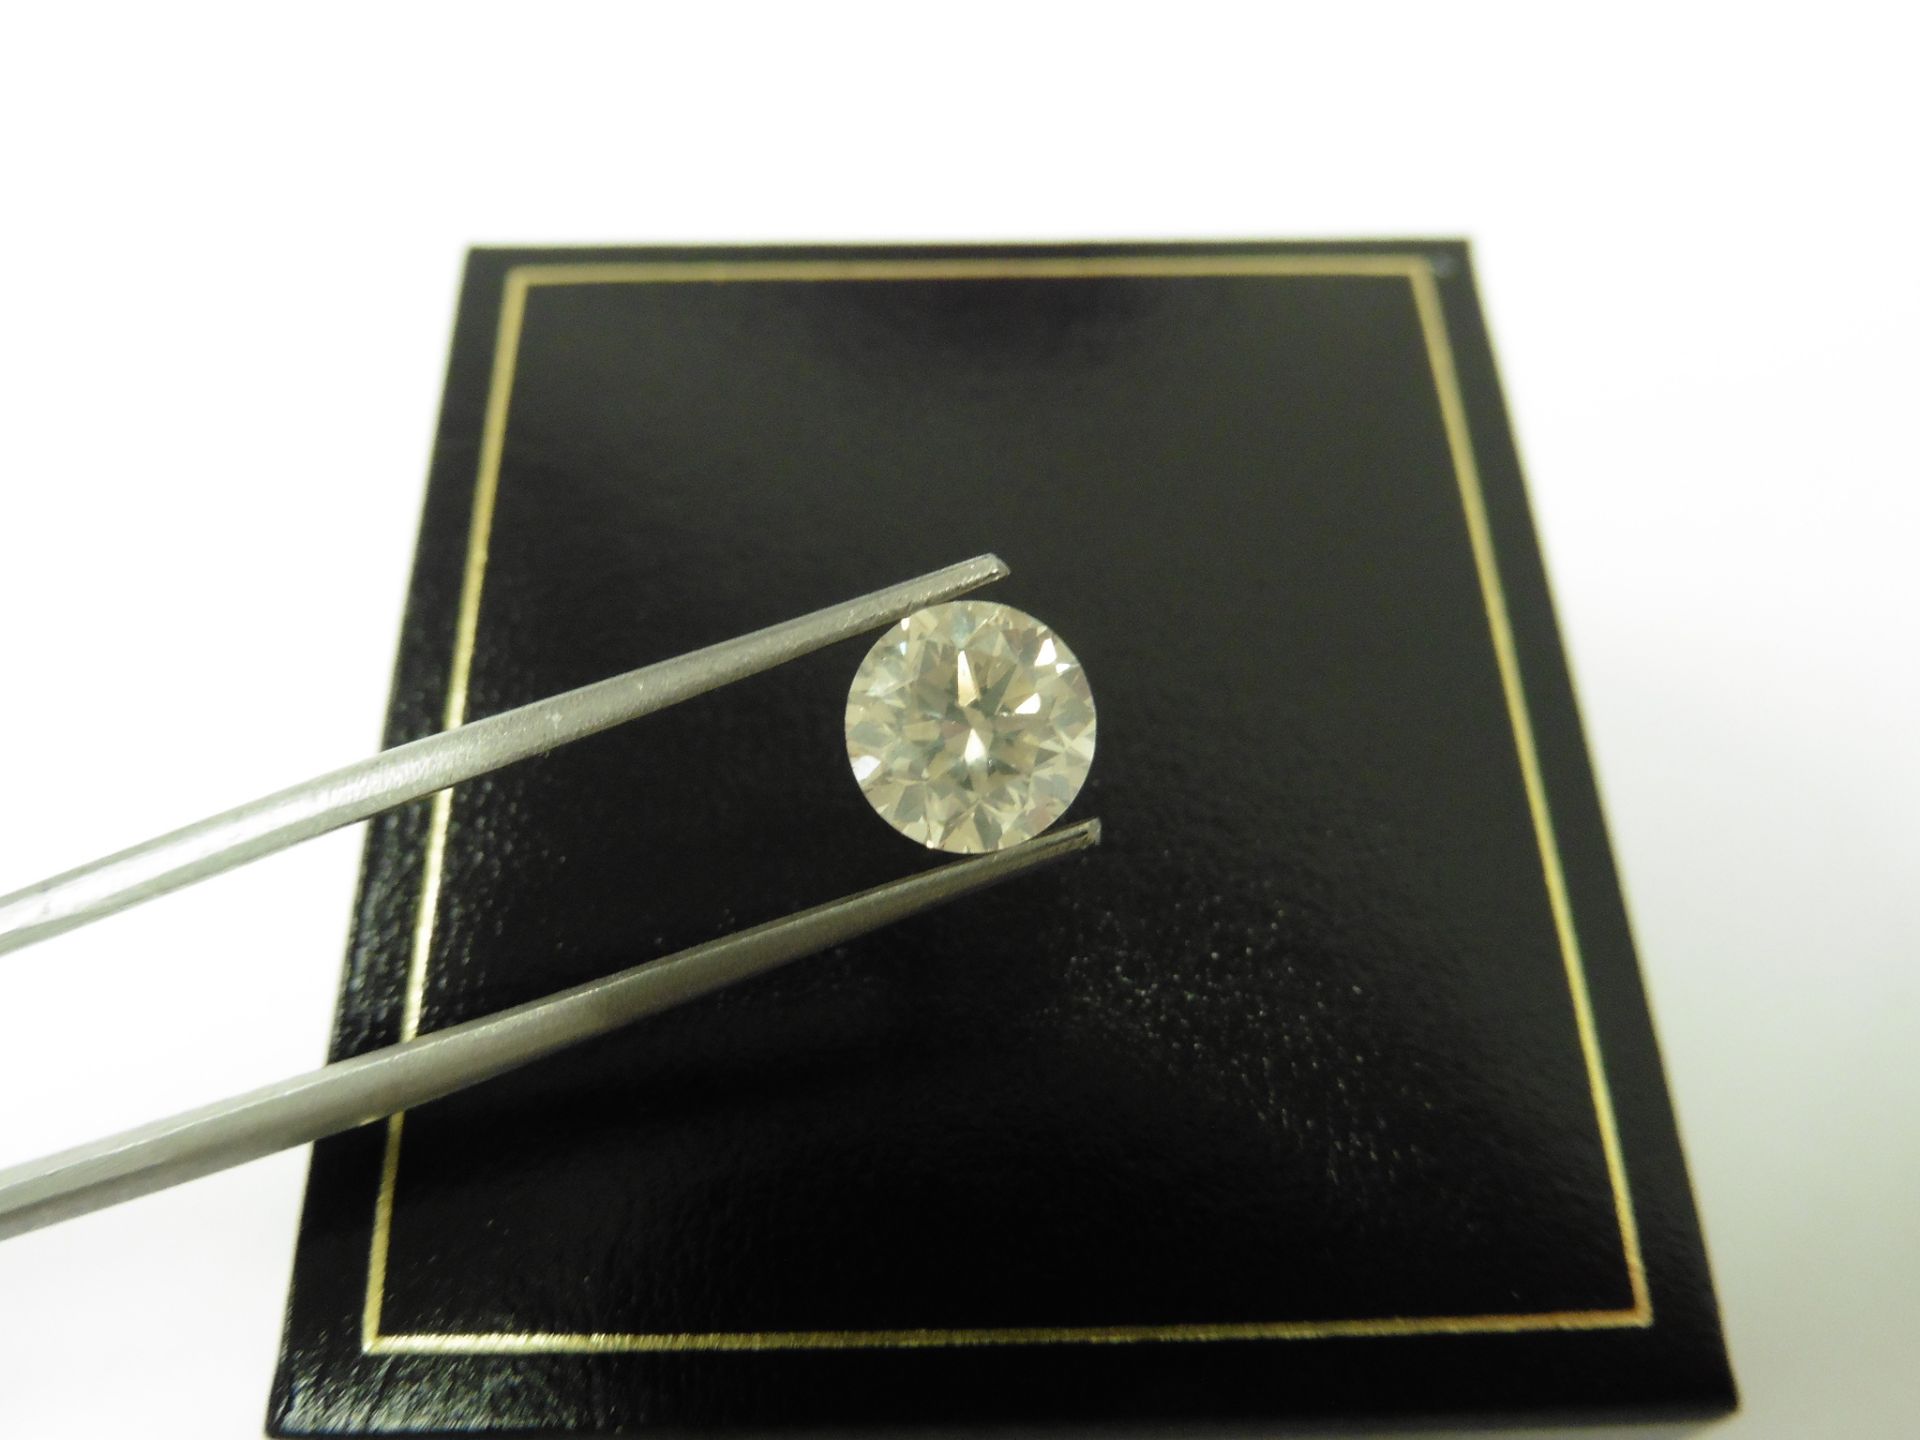 1.73ct natural loose brilliant cut diamond. H colour and I1 clarity. No certification but can be